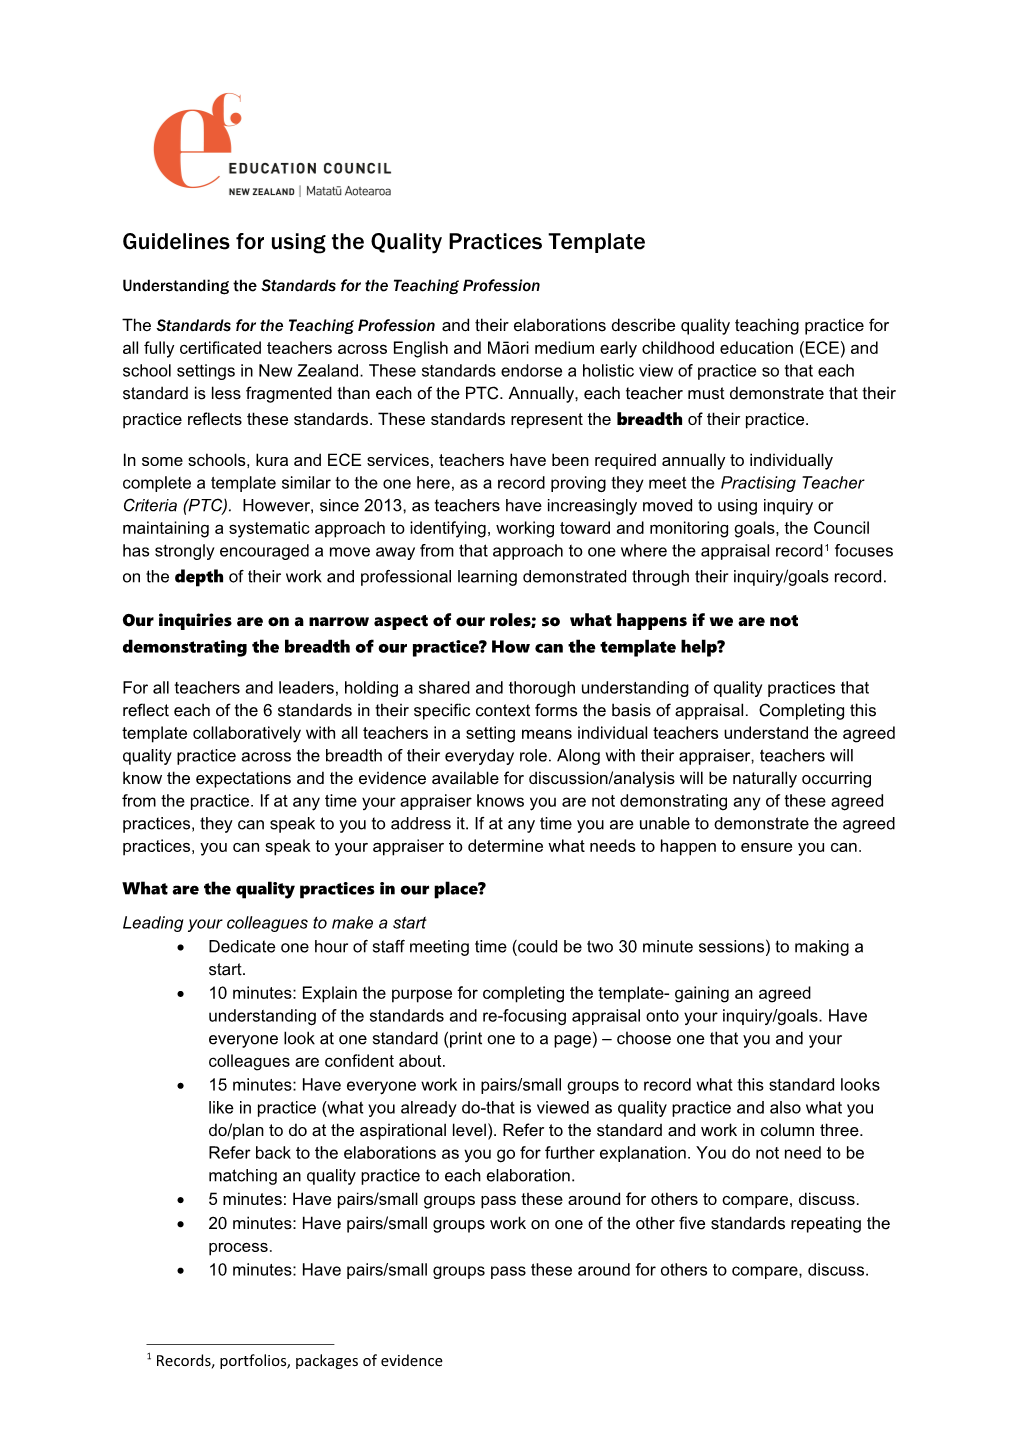 Guidelines for Using the Quality Practices Template